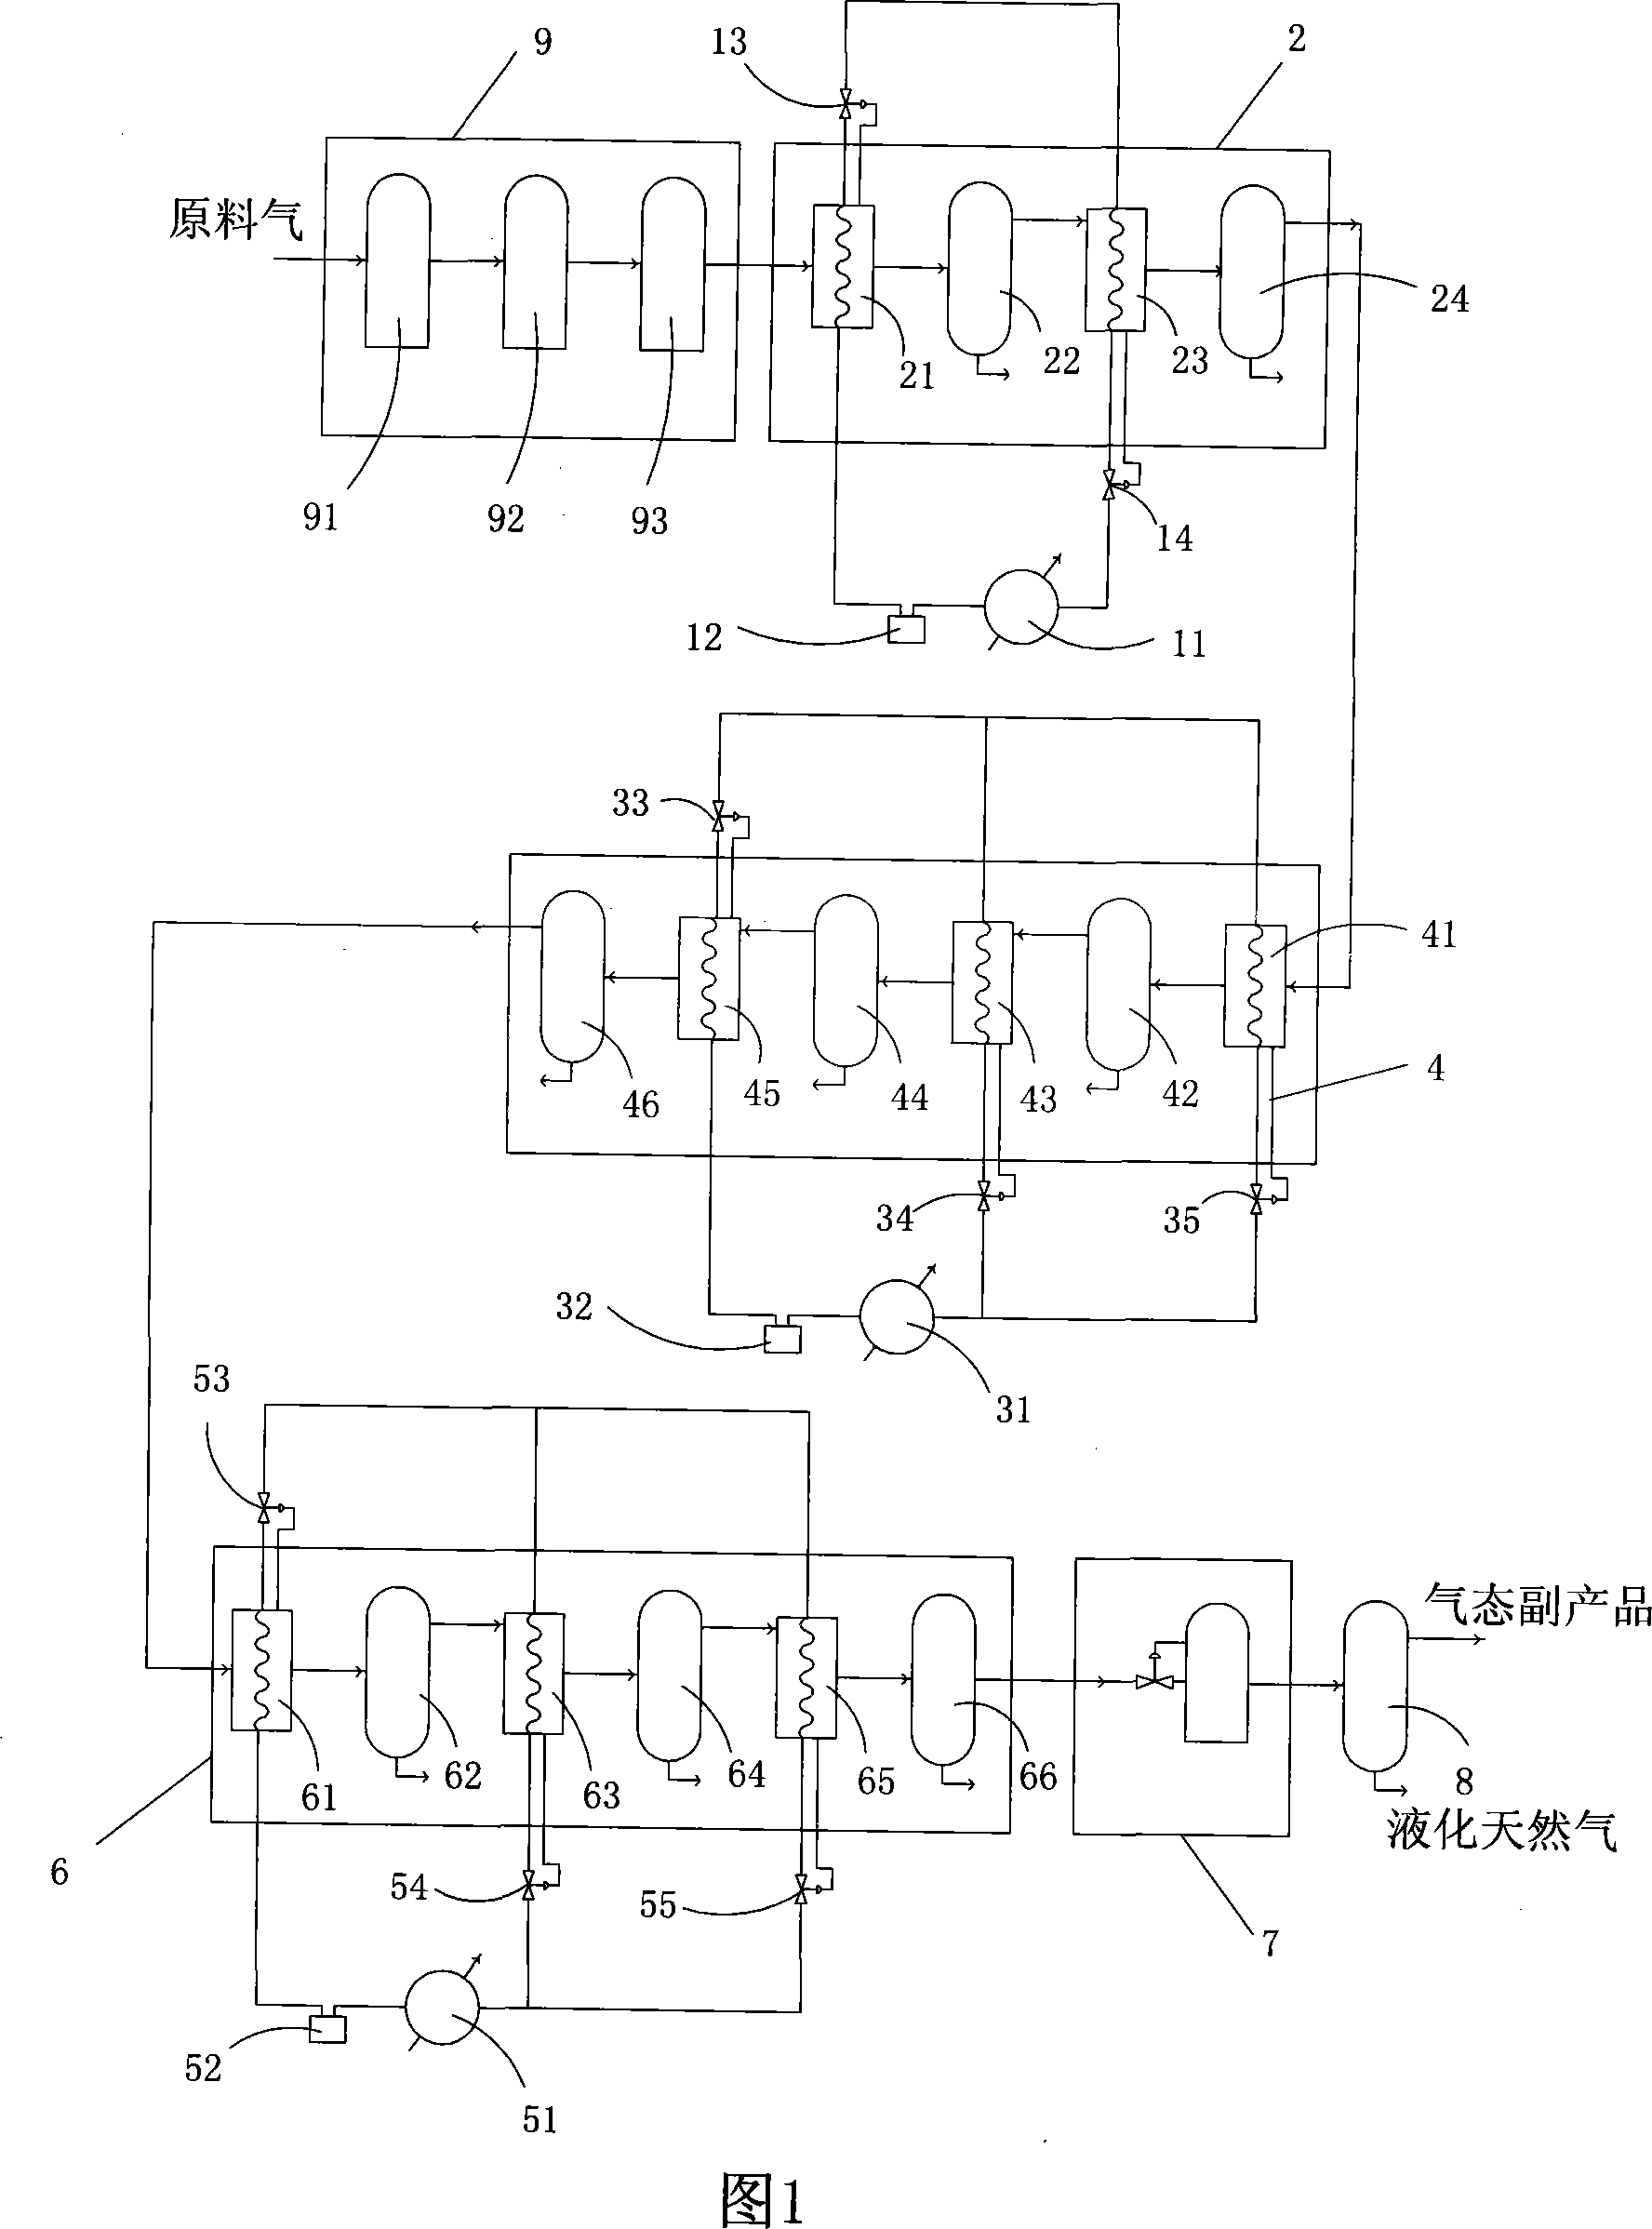 Cascade connection method for preparing liquefied natural gas